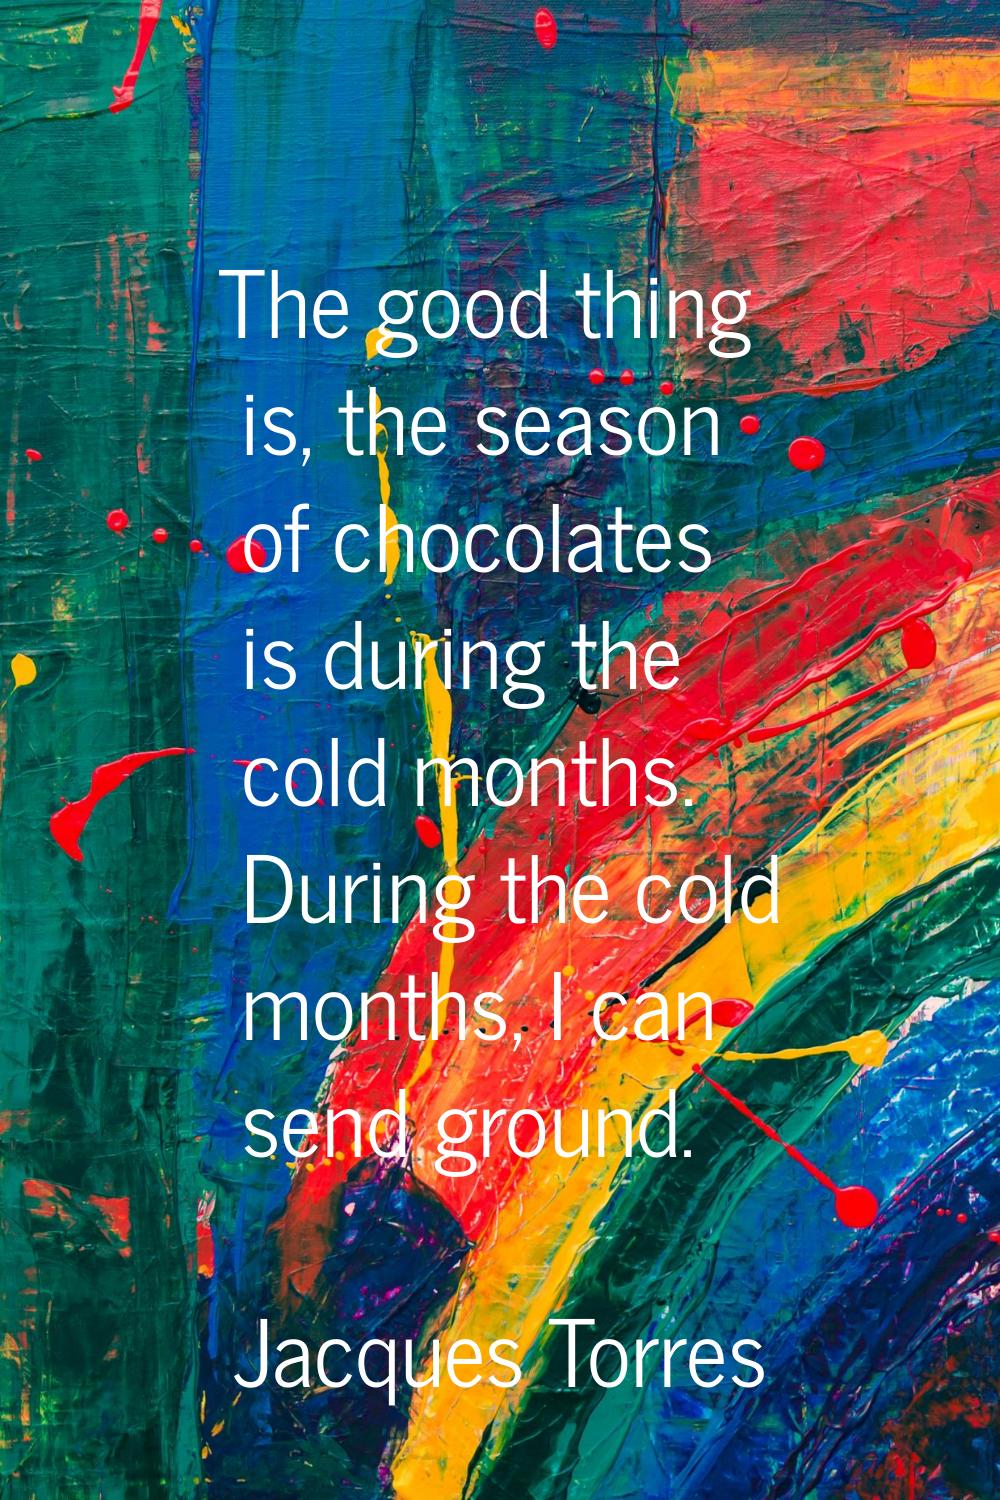 The good thing is, the season of chocolates is during the cold months. During the cold months, I ca